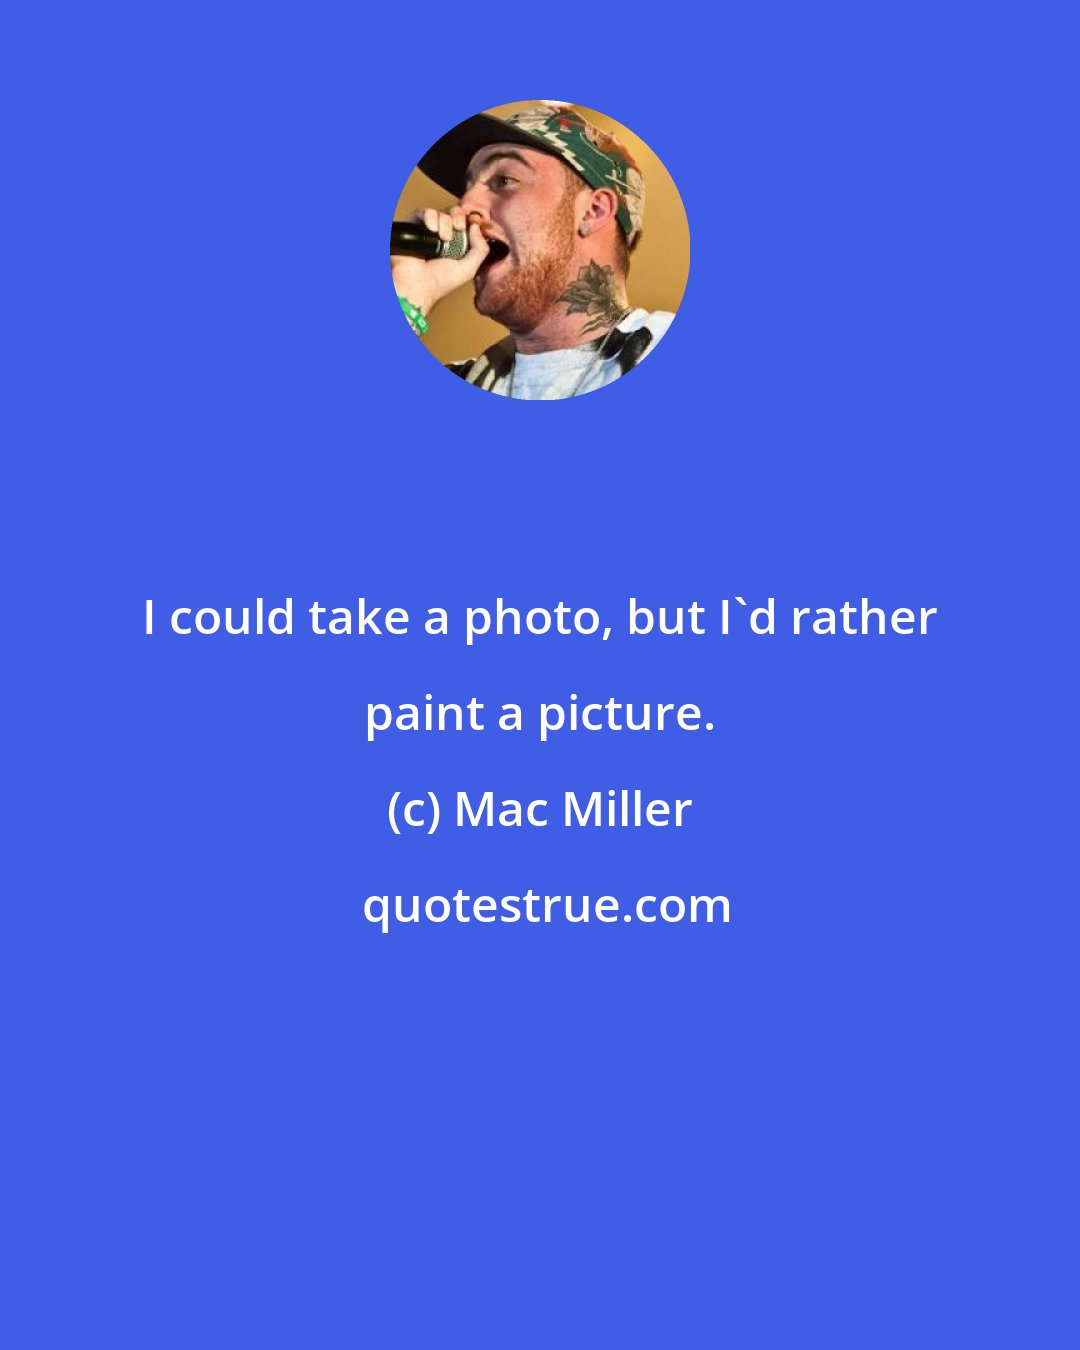 Mac Miller: I could take a photo, but I'd rather paint a picture.